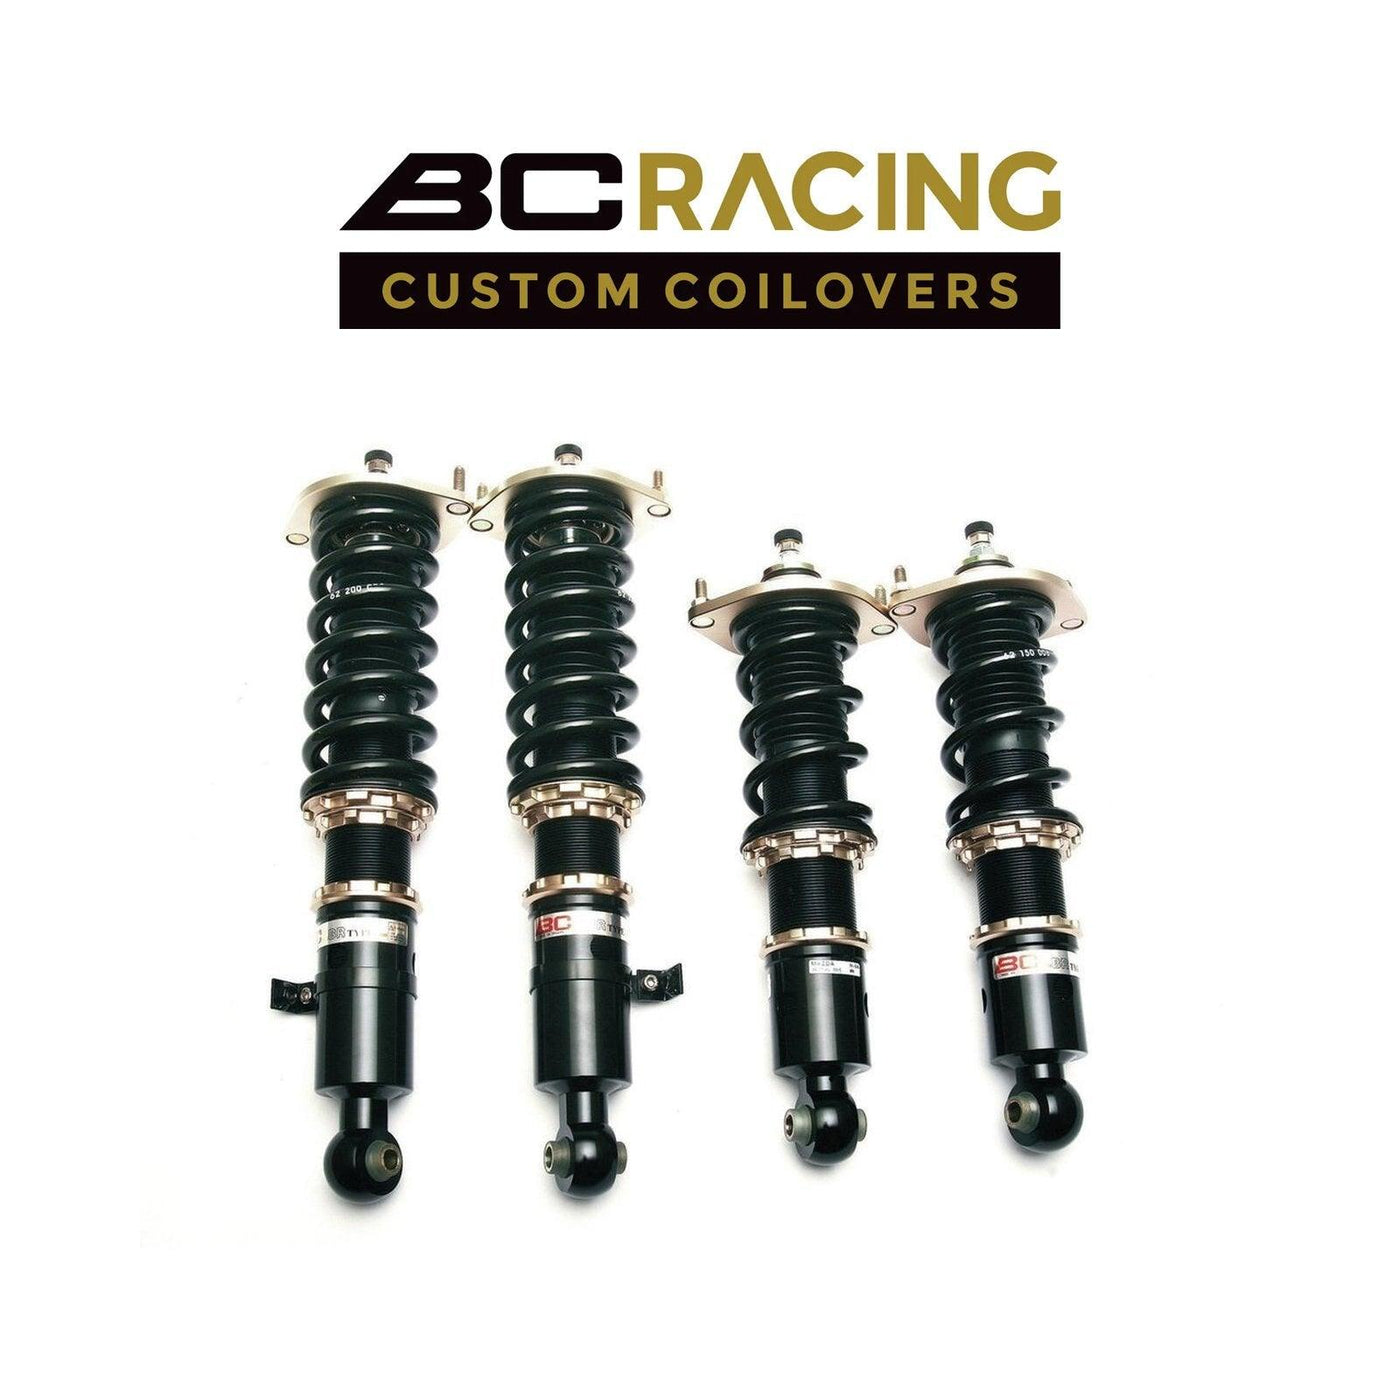 BC Racing Coilovers 2006-2012 LEXUS GS300/350 - Attacking the Clock Racing